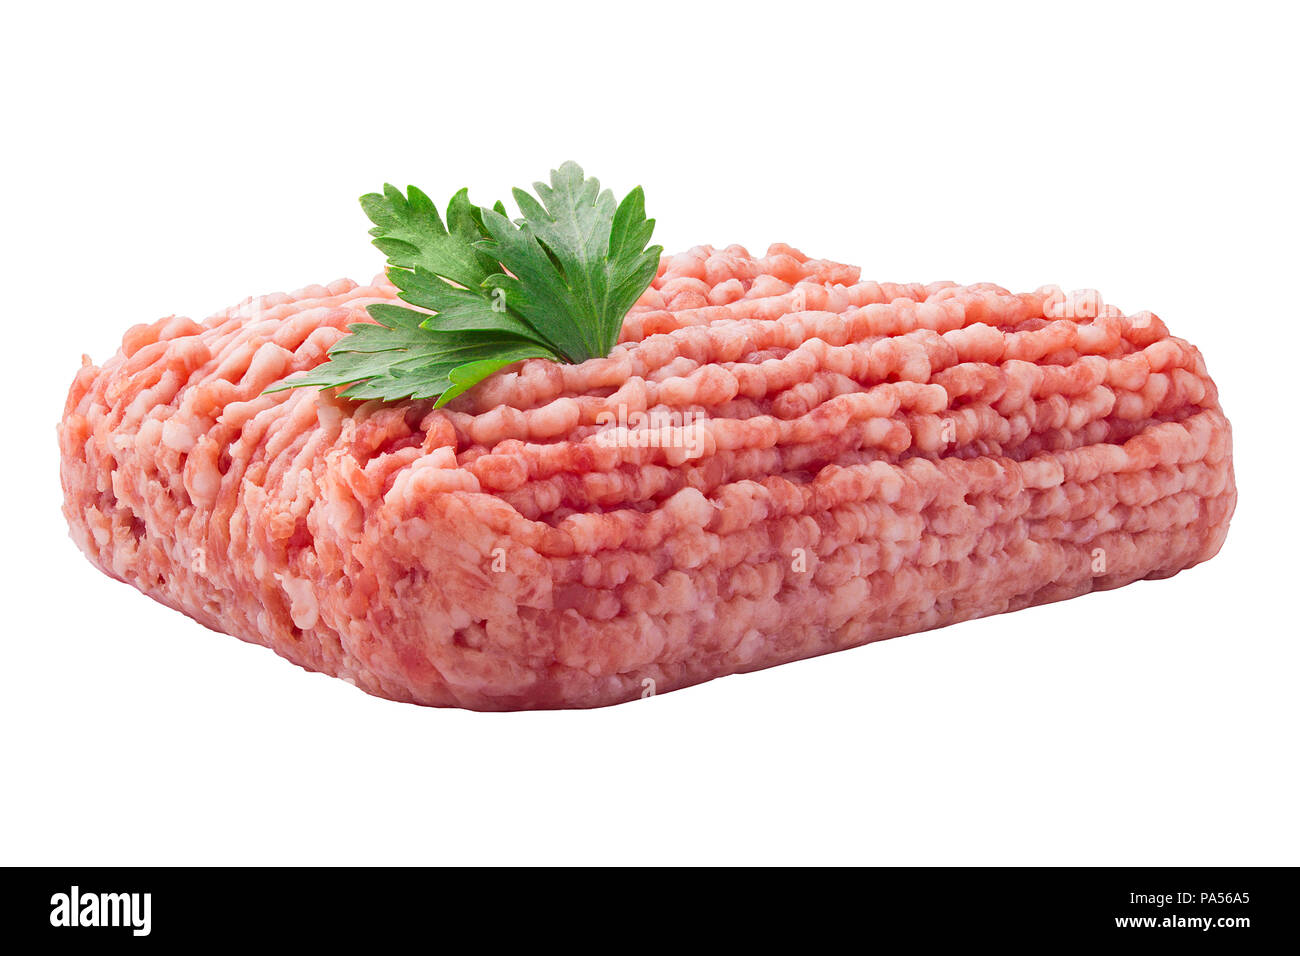 minced meat, pork, beef, forcemeat, clipping path, isolated on w Stock Photo